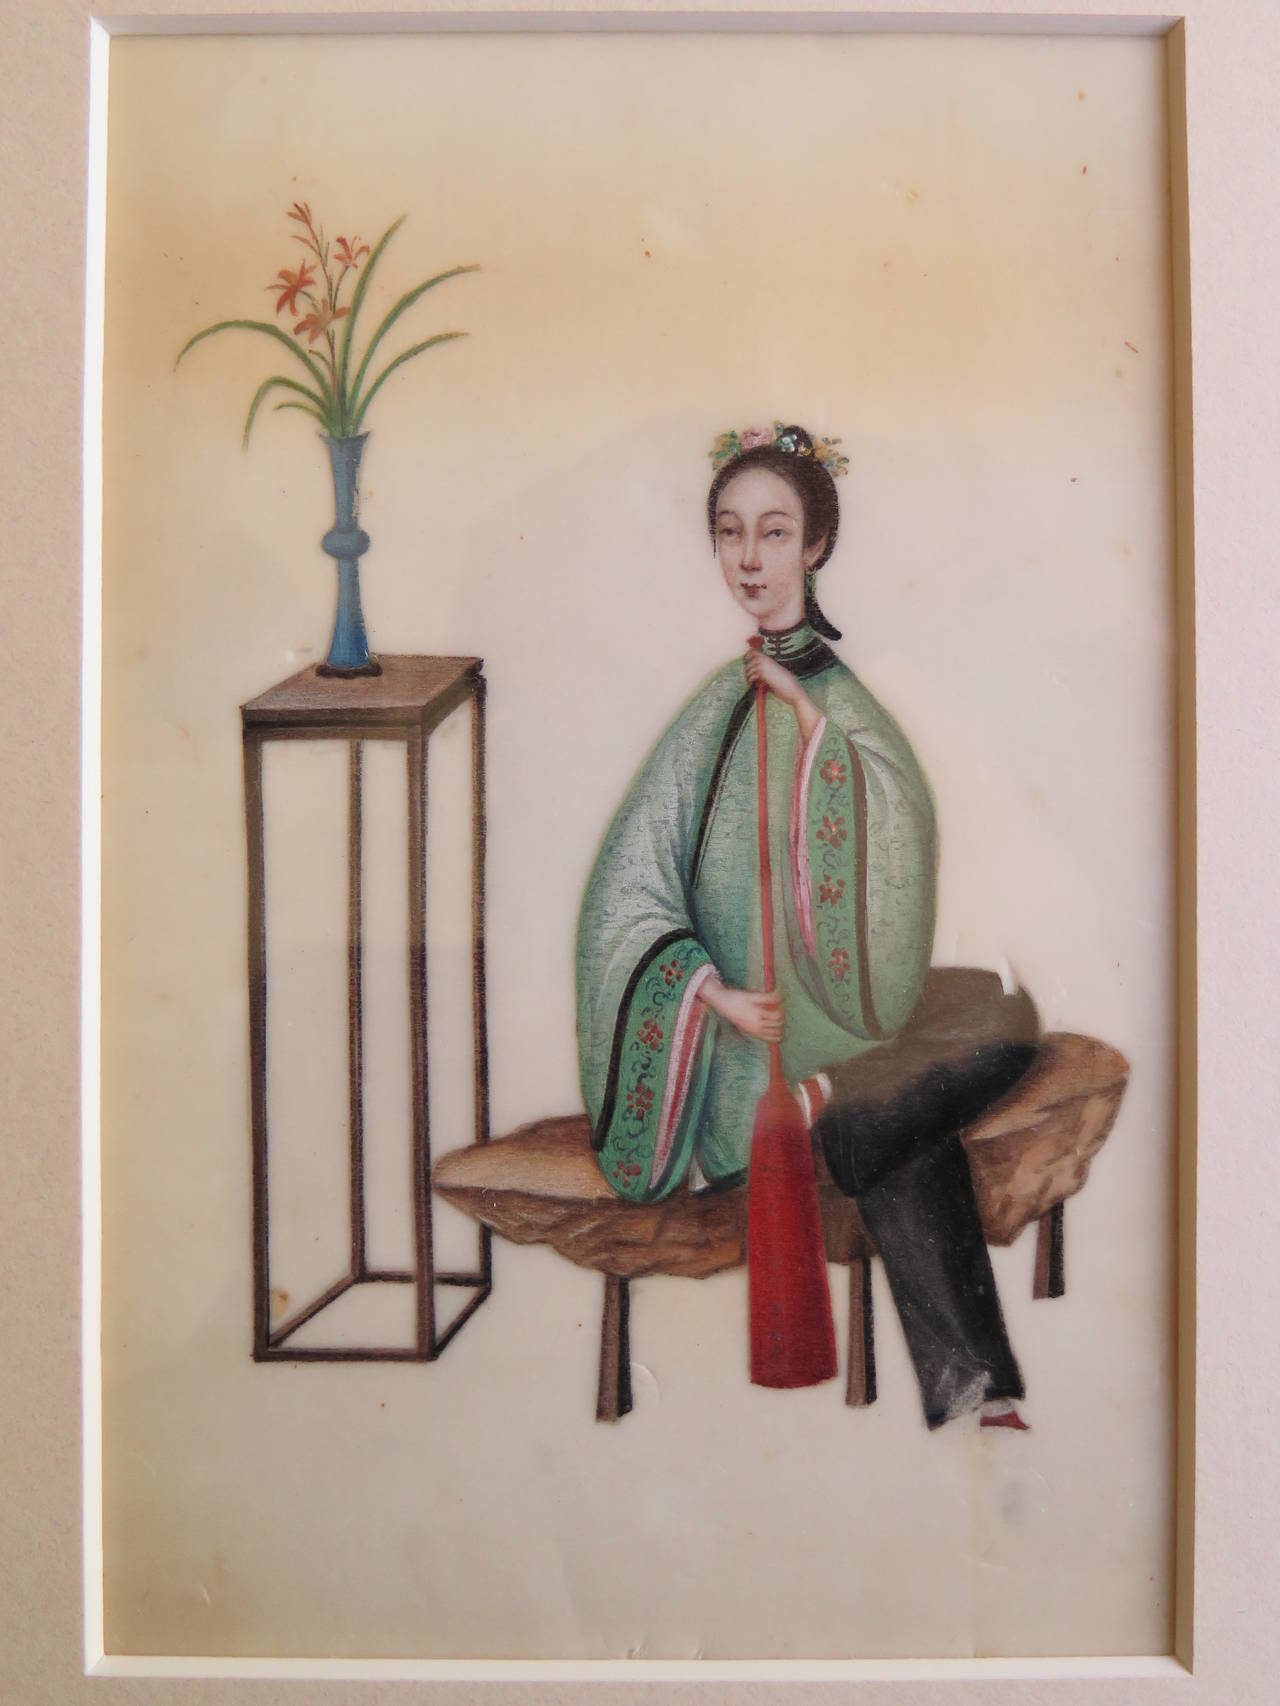 These are a beautifully painted pair of Chinese water-colours from the early 19th century, circa 1830

Both paintings depict ladies in a seated position playing musical instruments sat by tables holding flower vases. The ladies have very slim